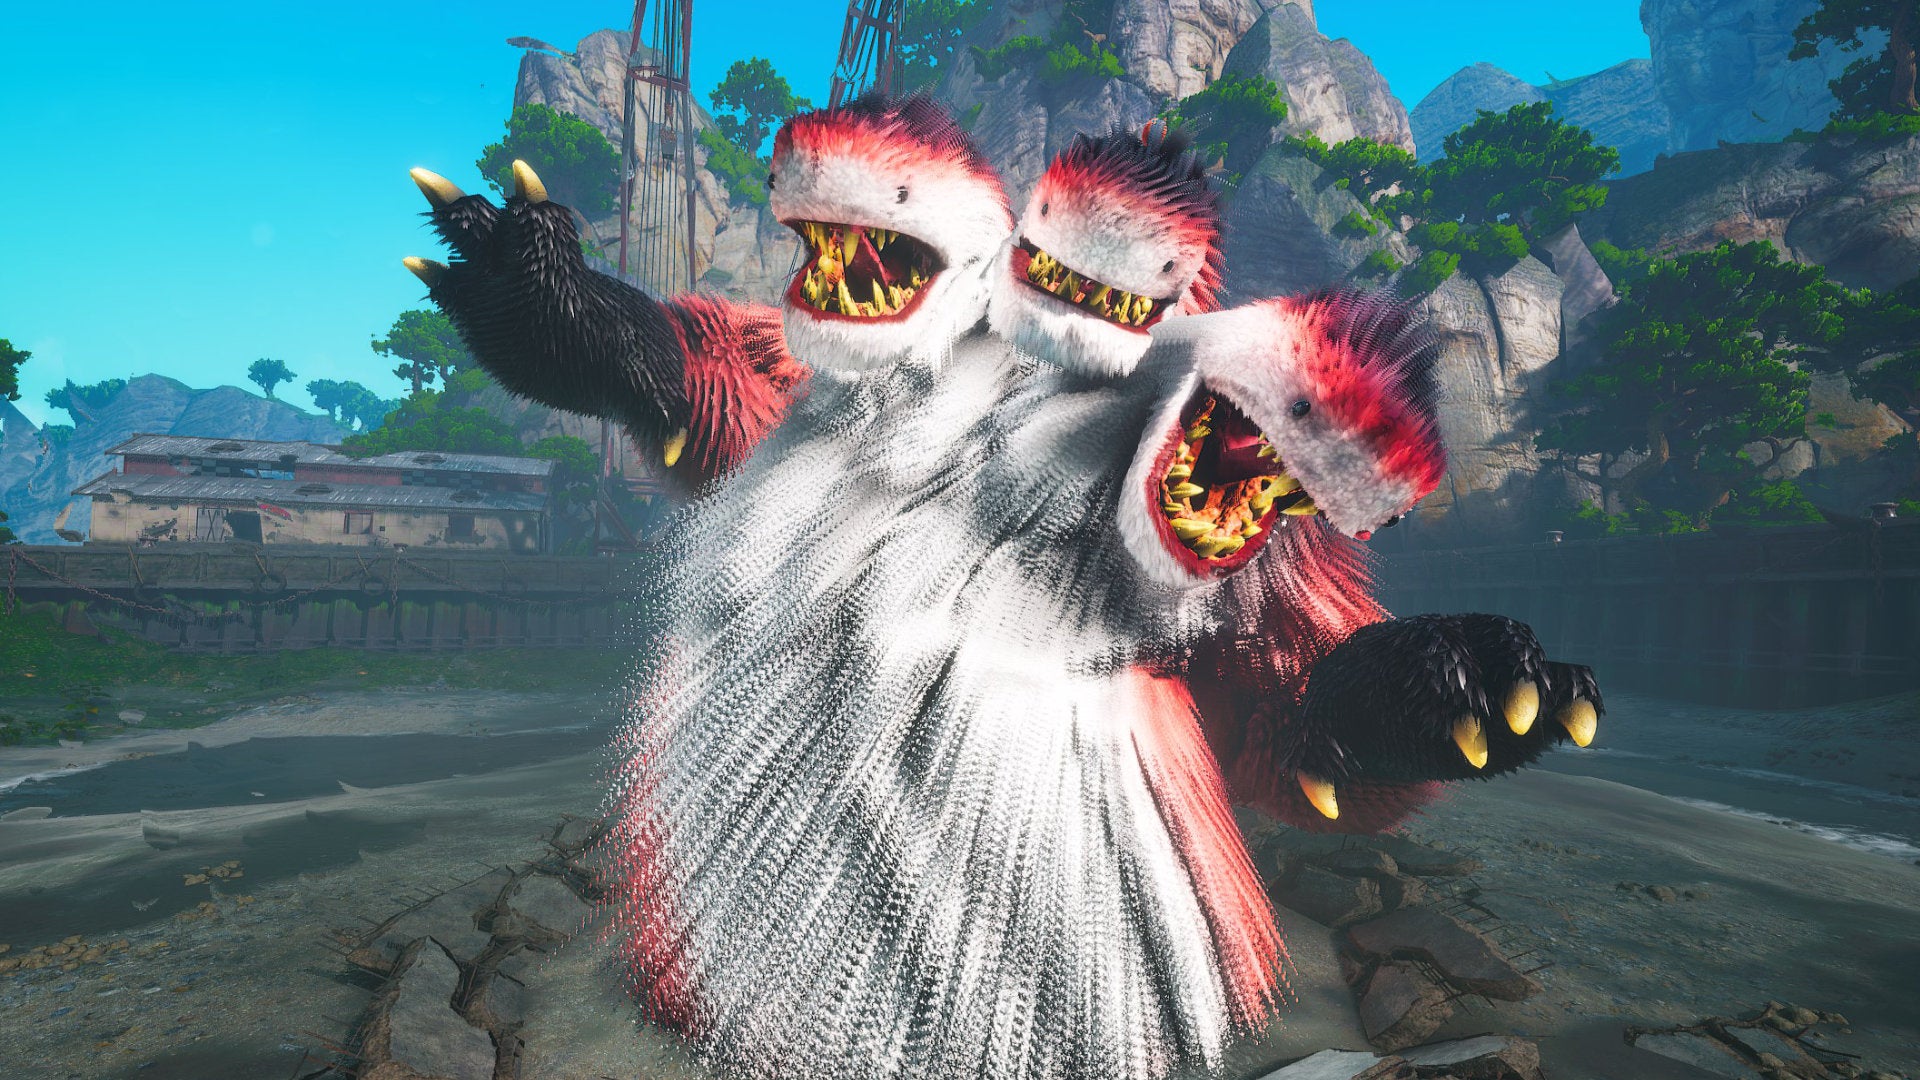 A Biomutant screenshot of the Porky Puff boss, during the land phase of the boss fight.